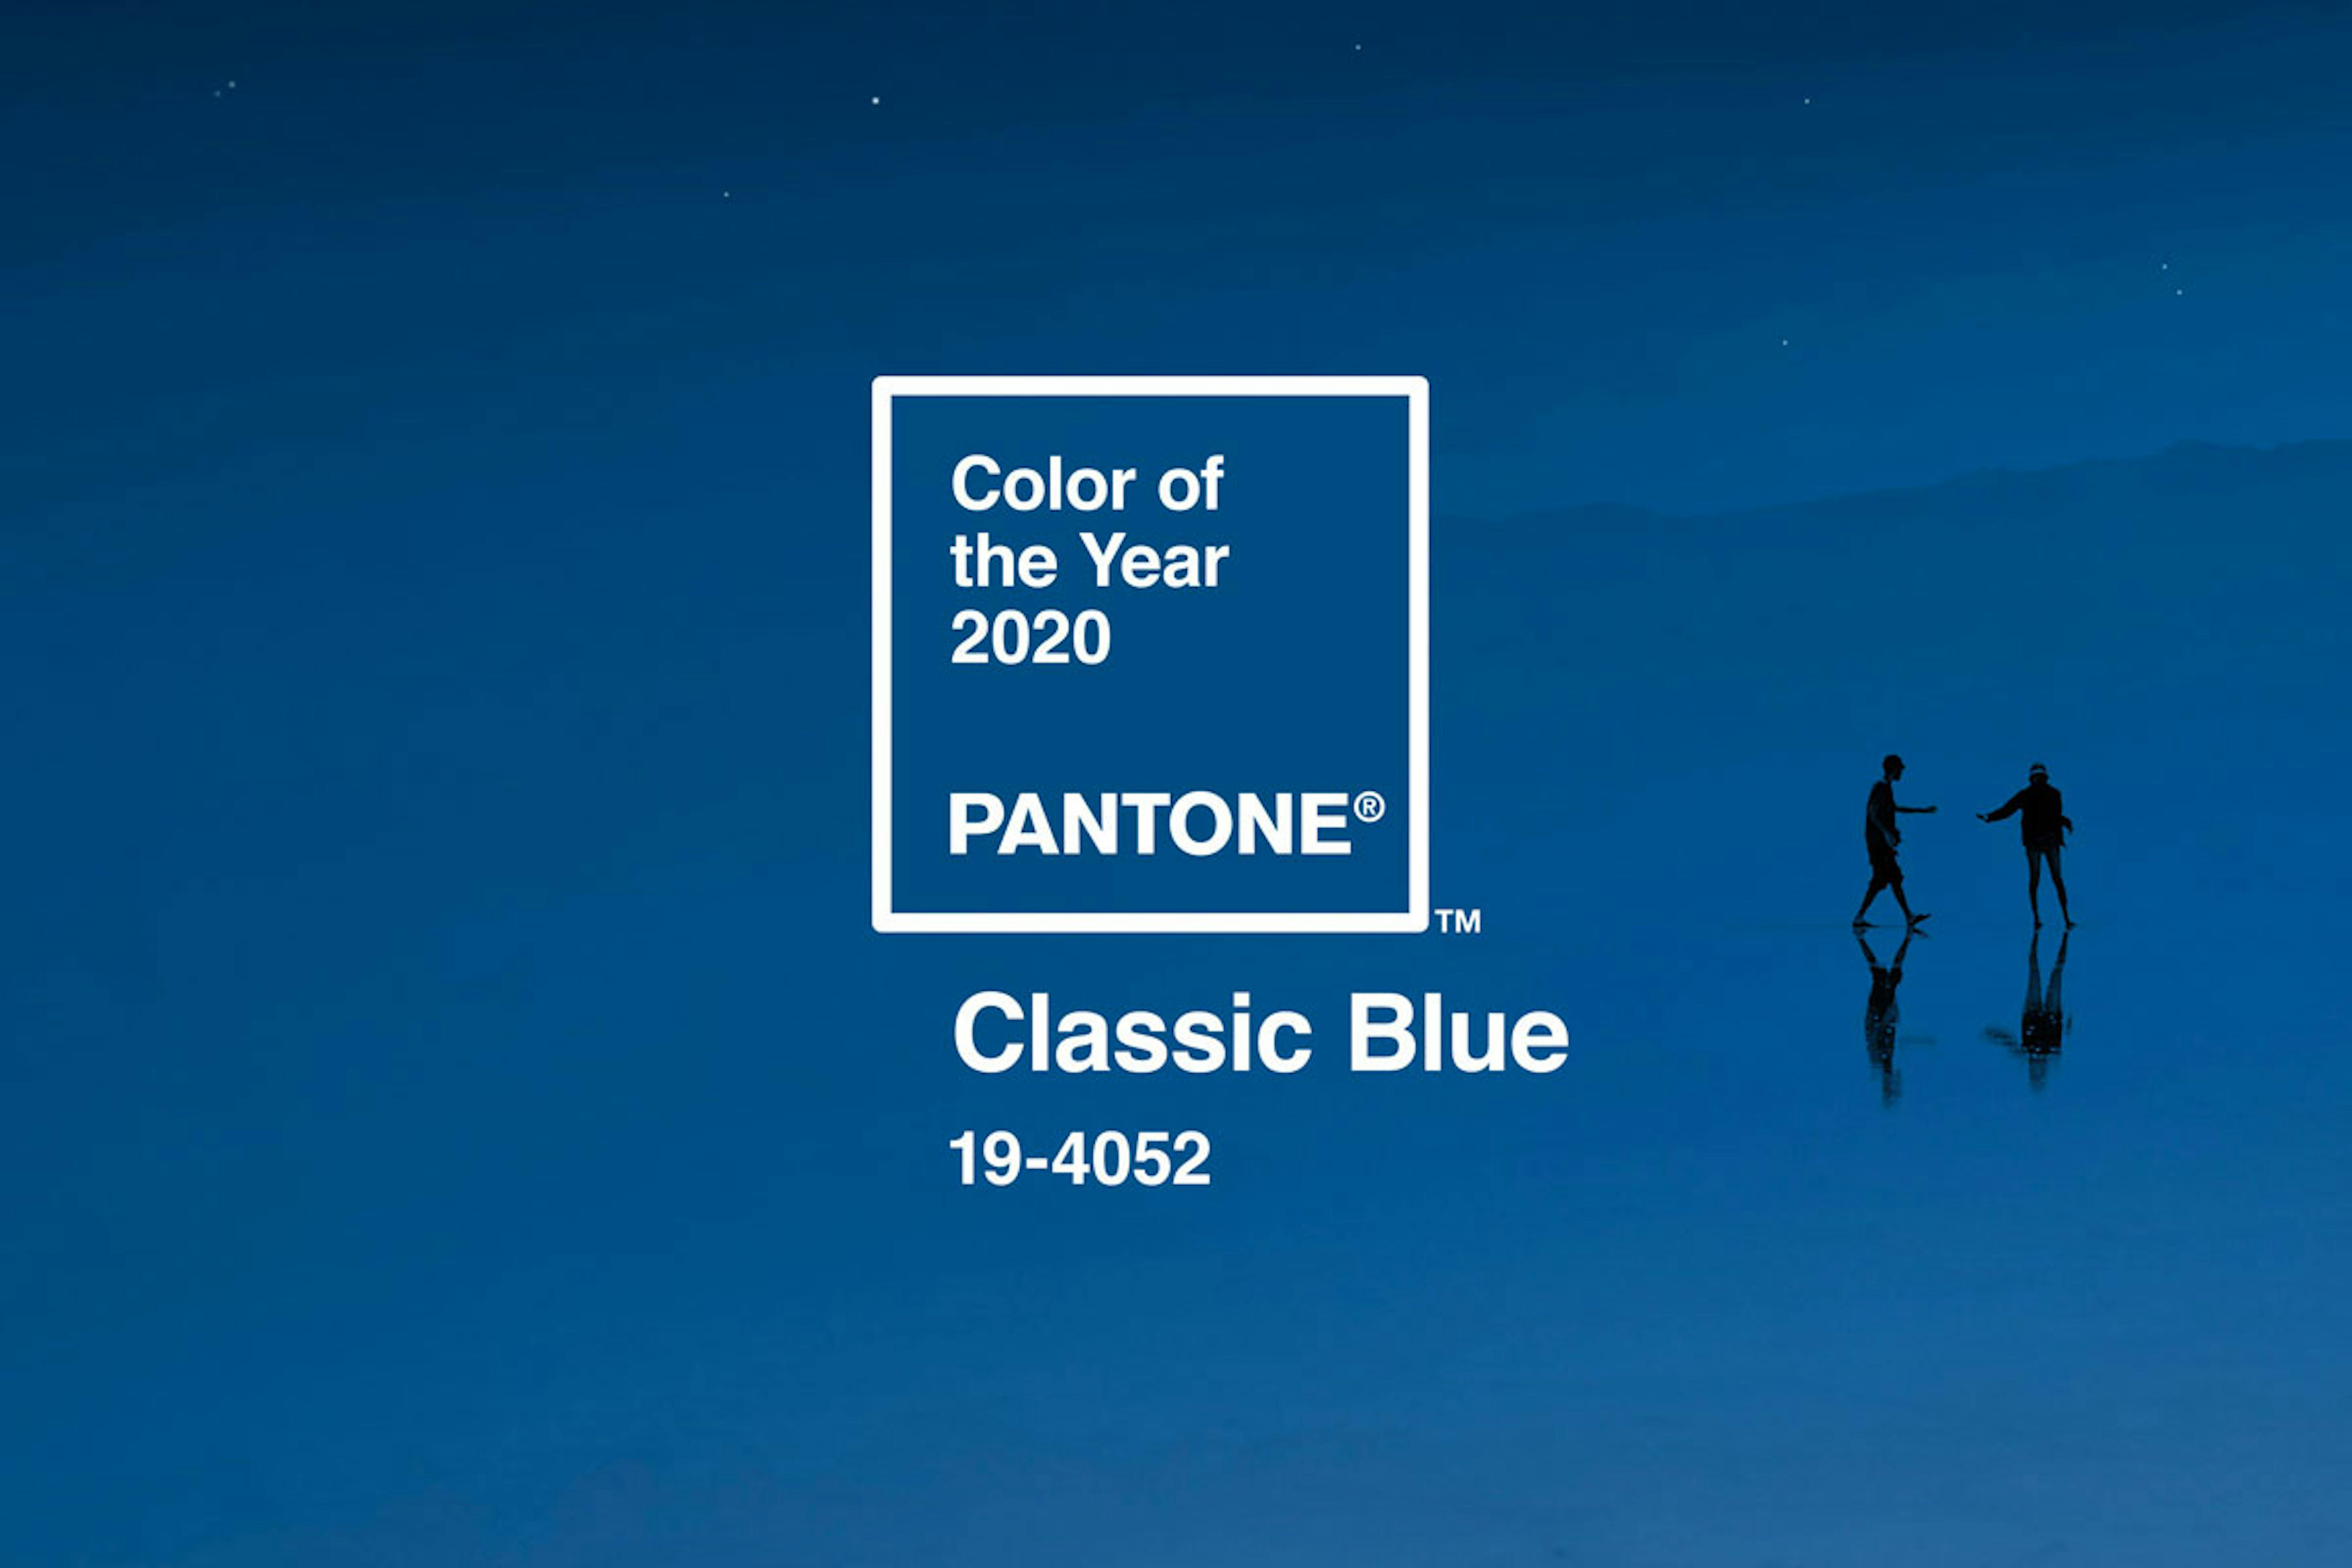 Classic styling for Pantone's colour of the year 2020